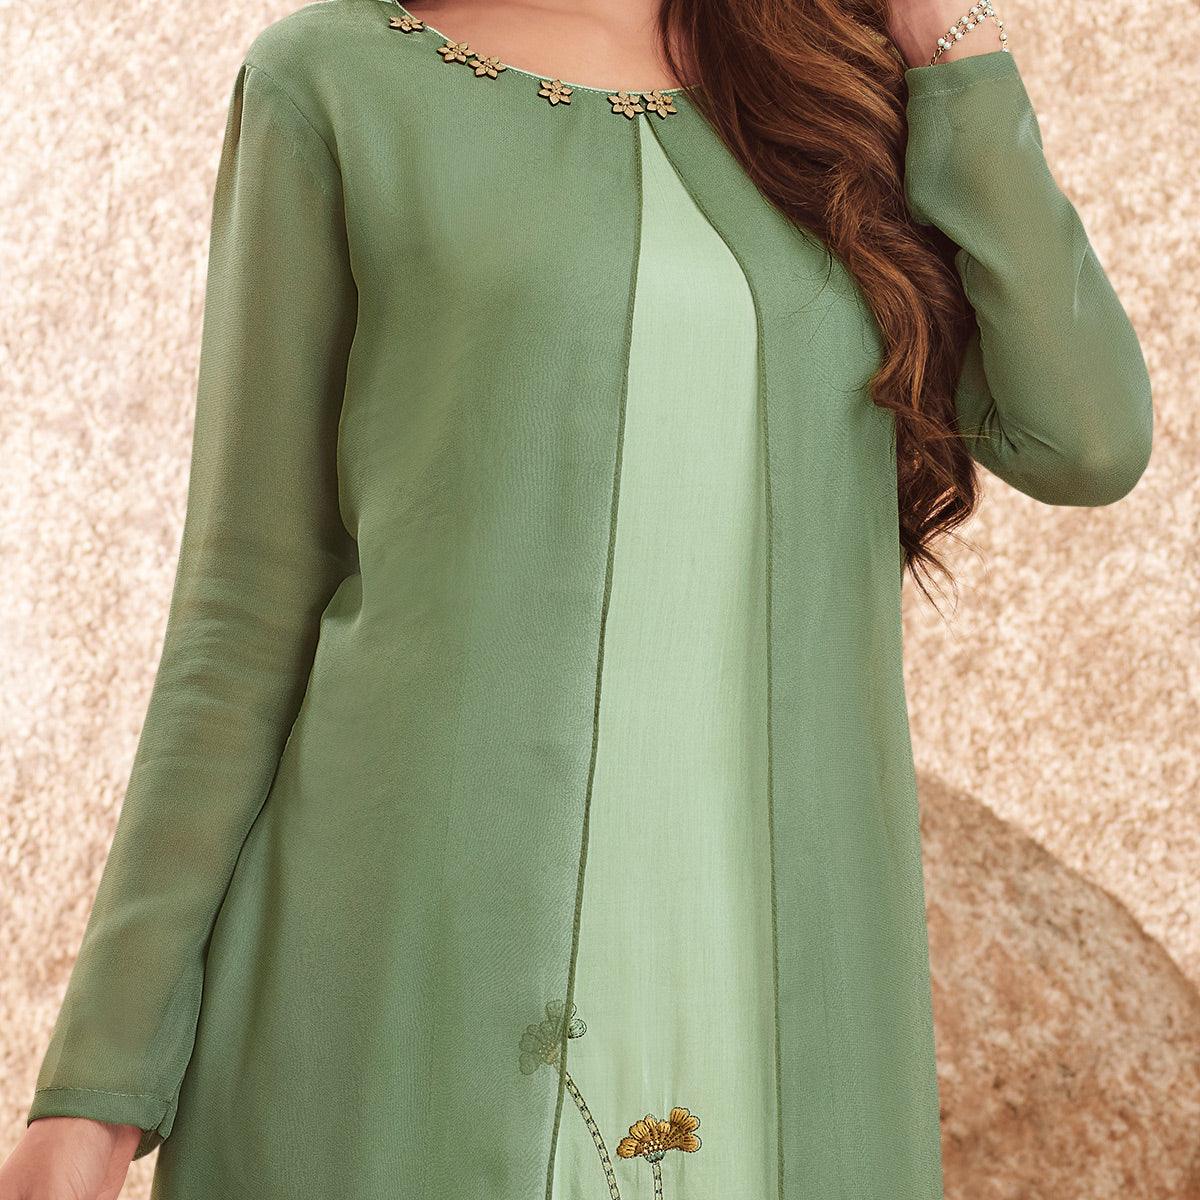 Graceful Green Colored Party Wear Floral Embroidered Viscose-Muslin Cotton Silk Kurti - Peachmode